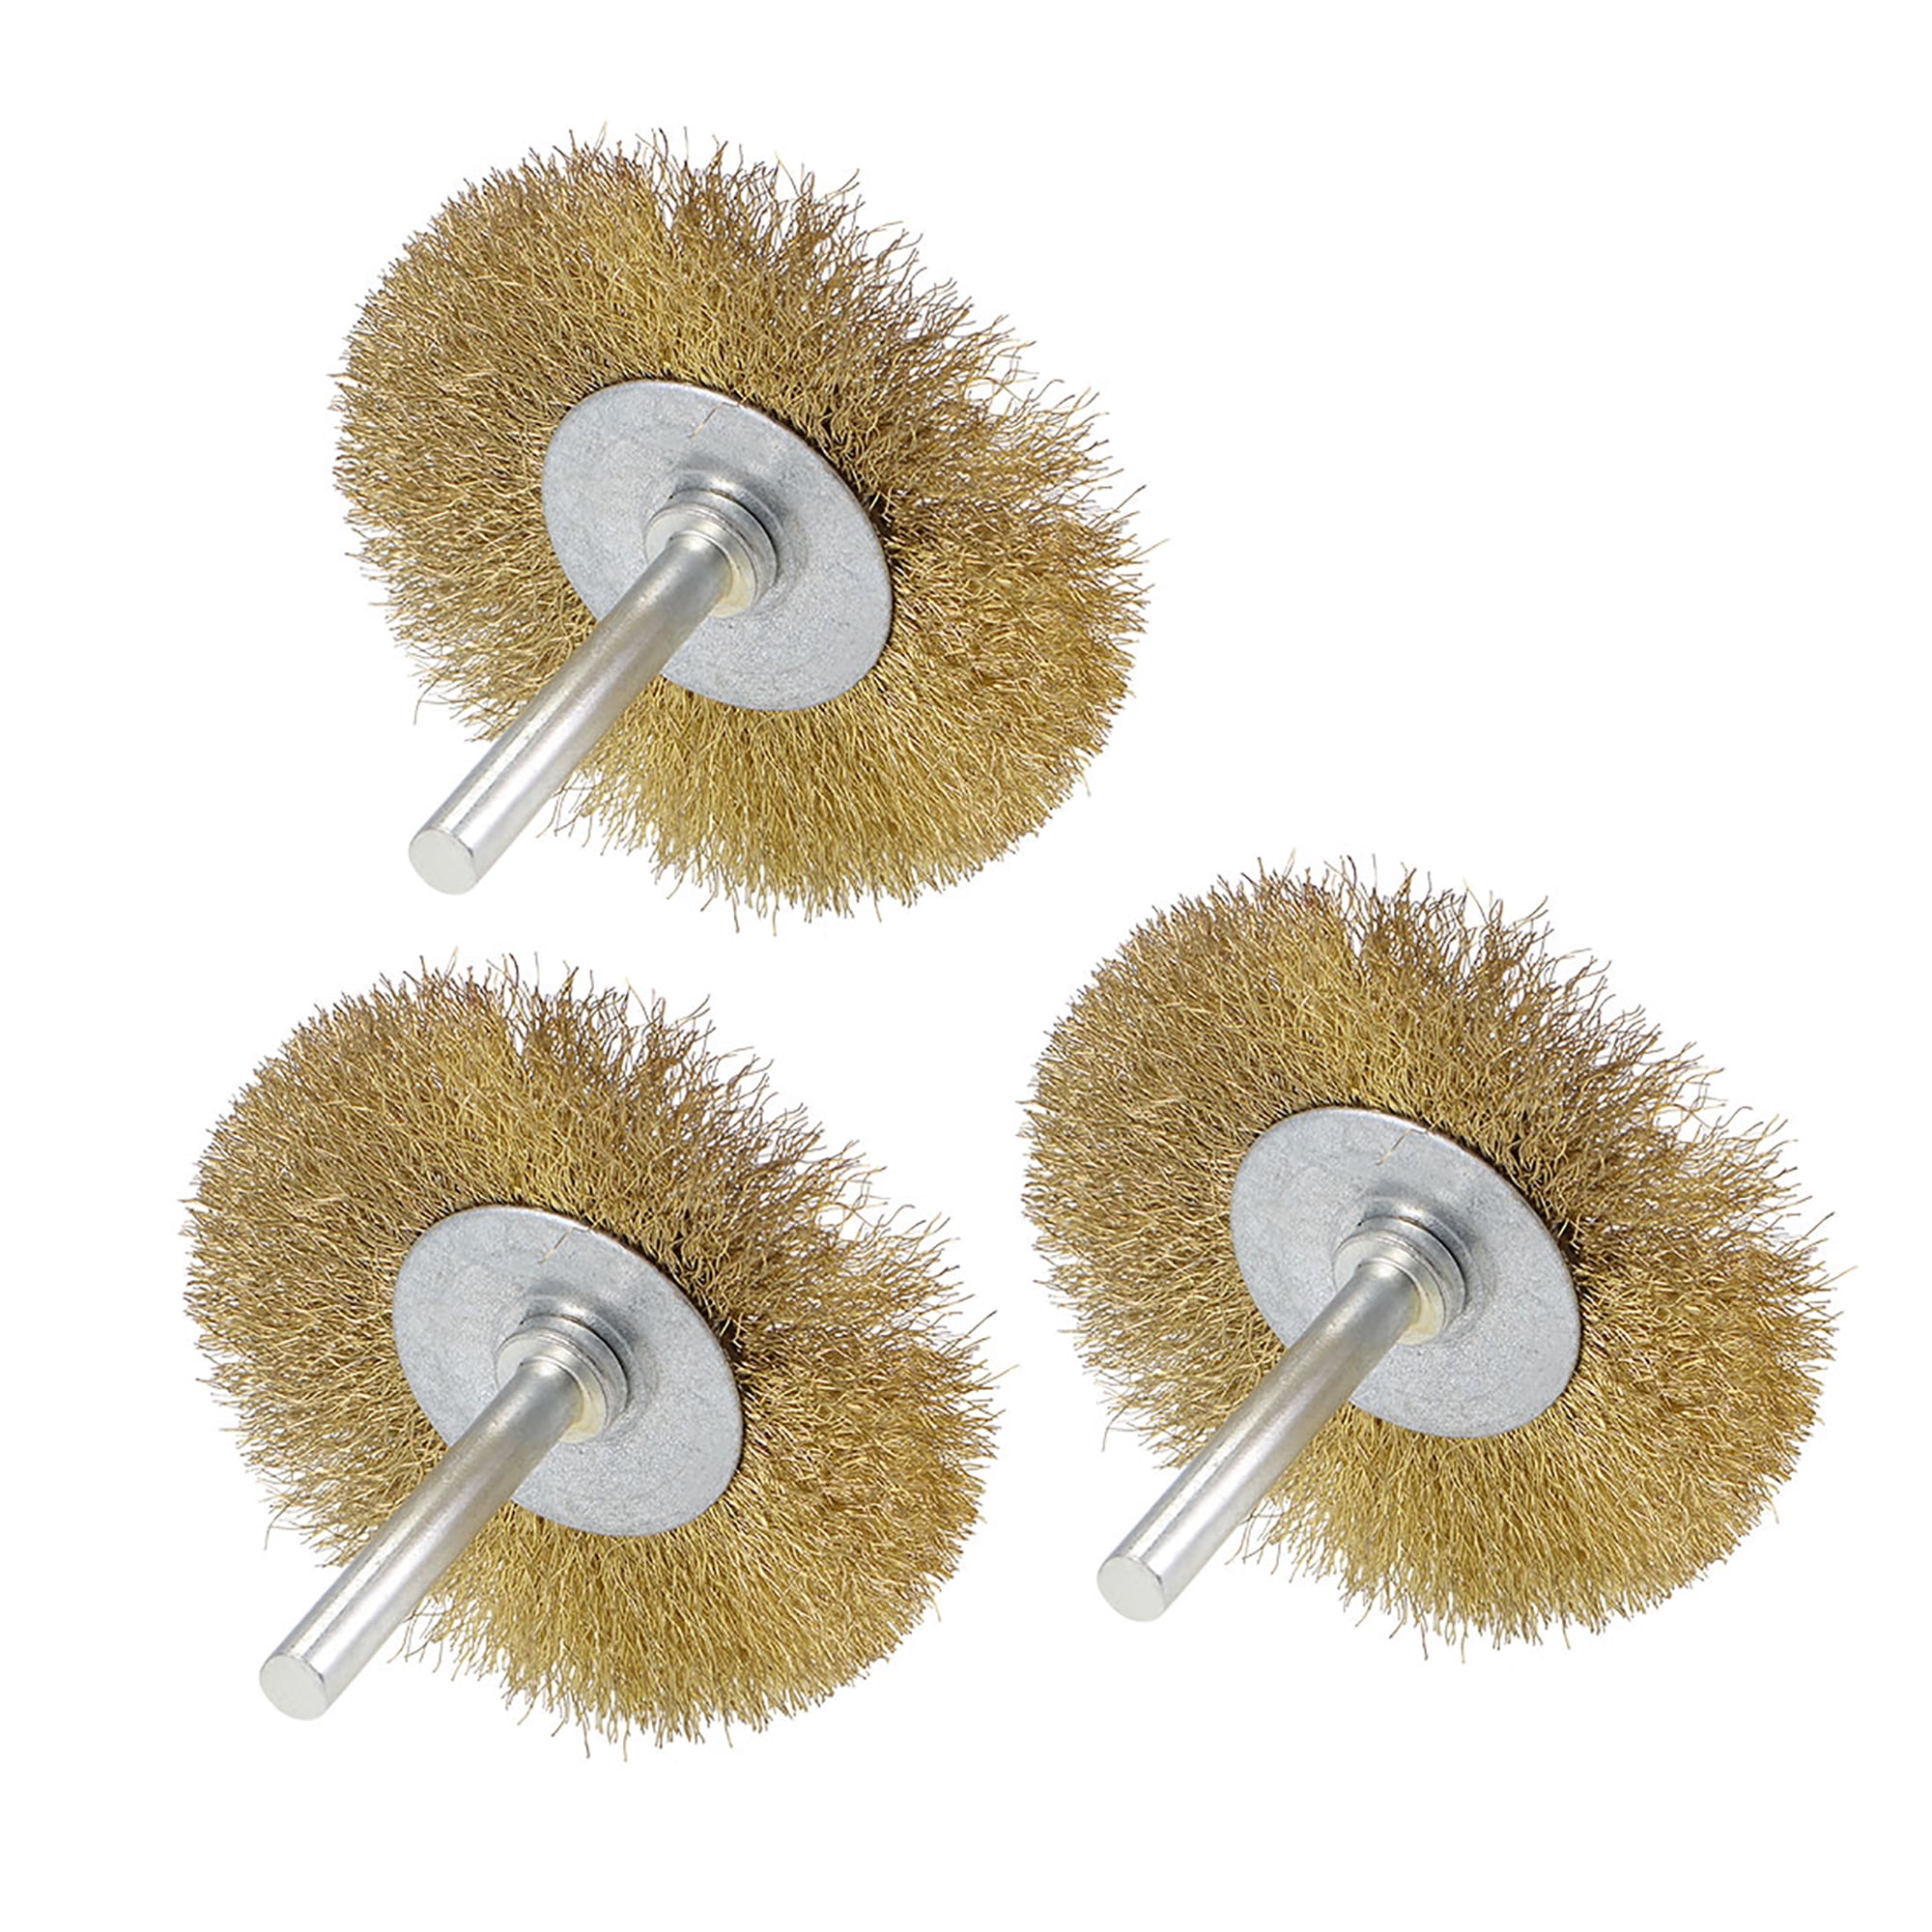 uxcell 3-Inch Wire Wheel Brush Bench Brass Plated Crimped Steel with 1/4-Inch Arbor Hole 5 Pcs 